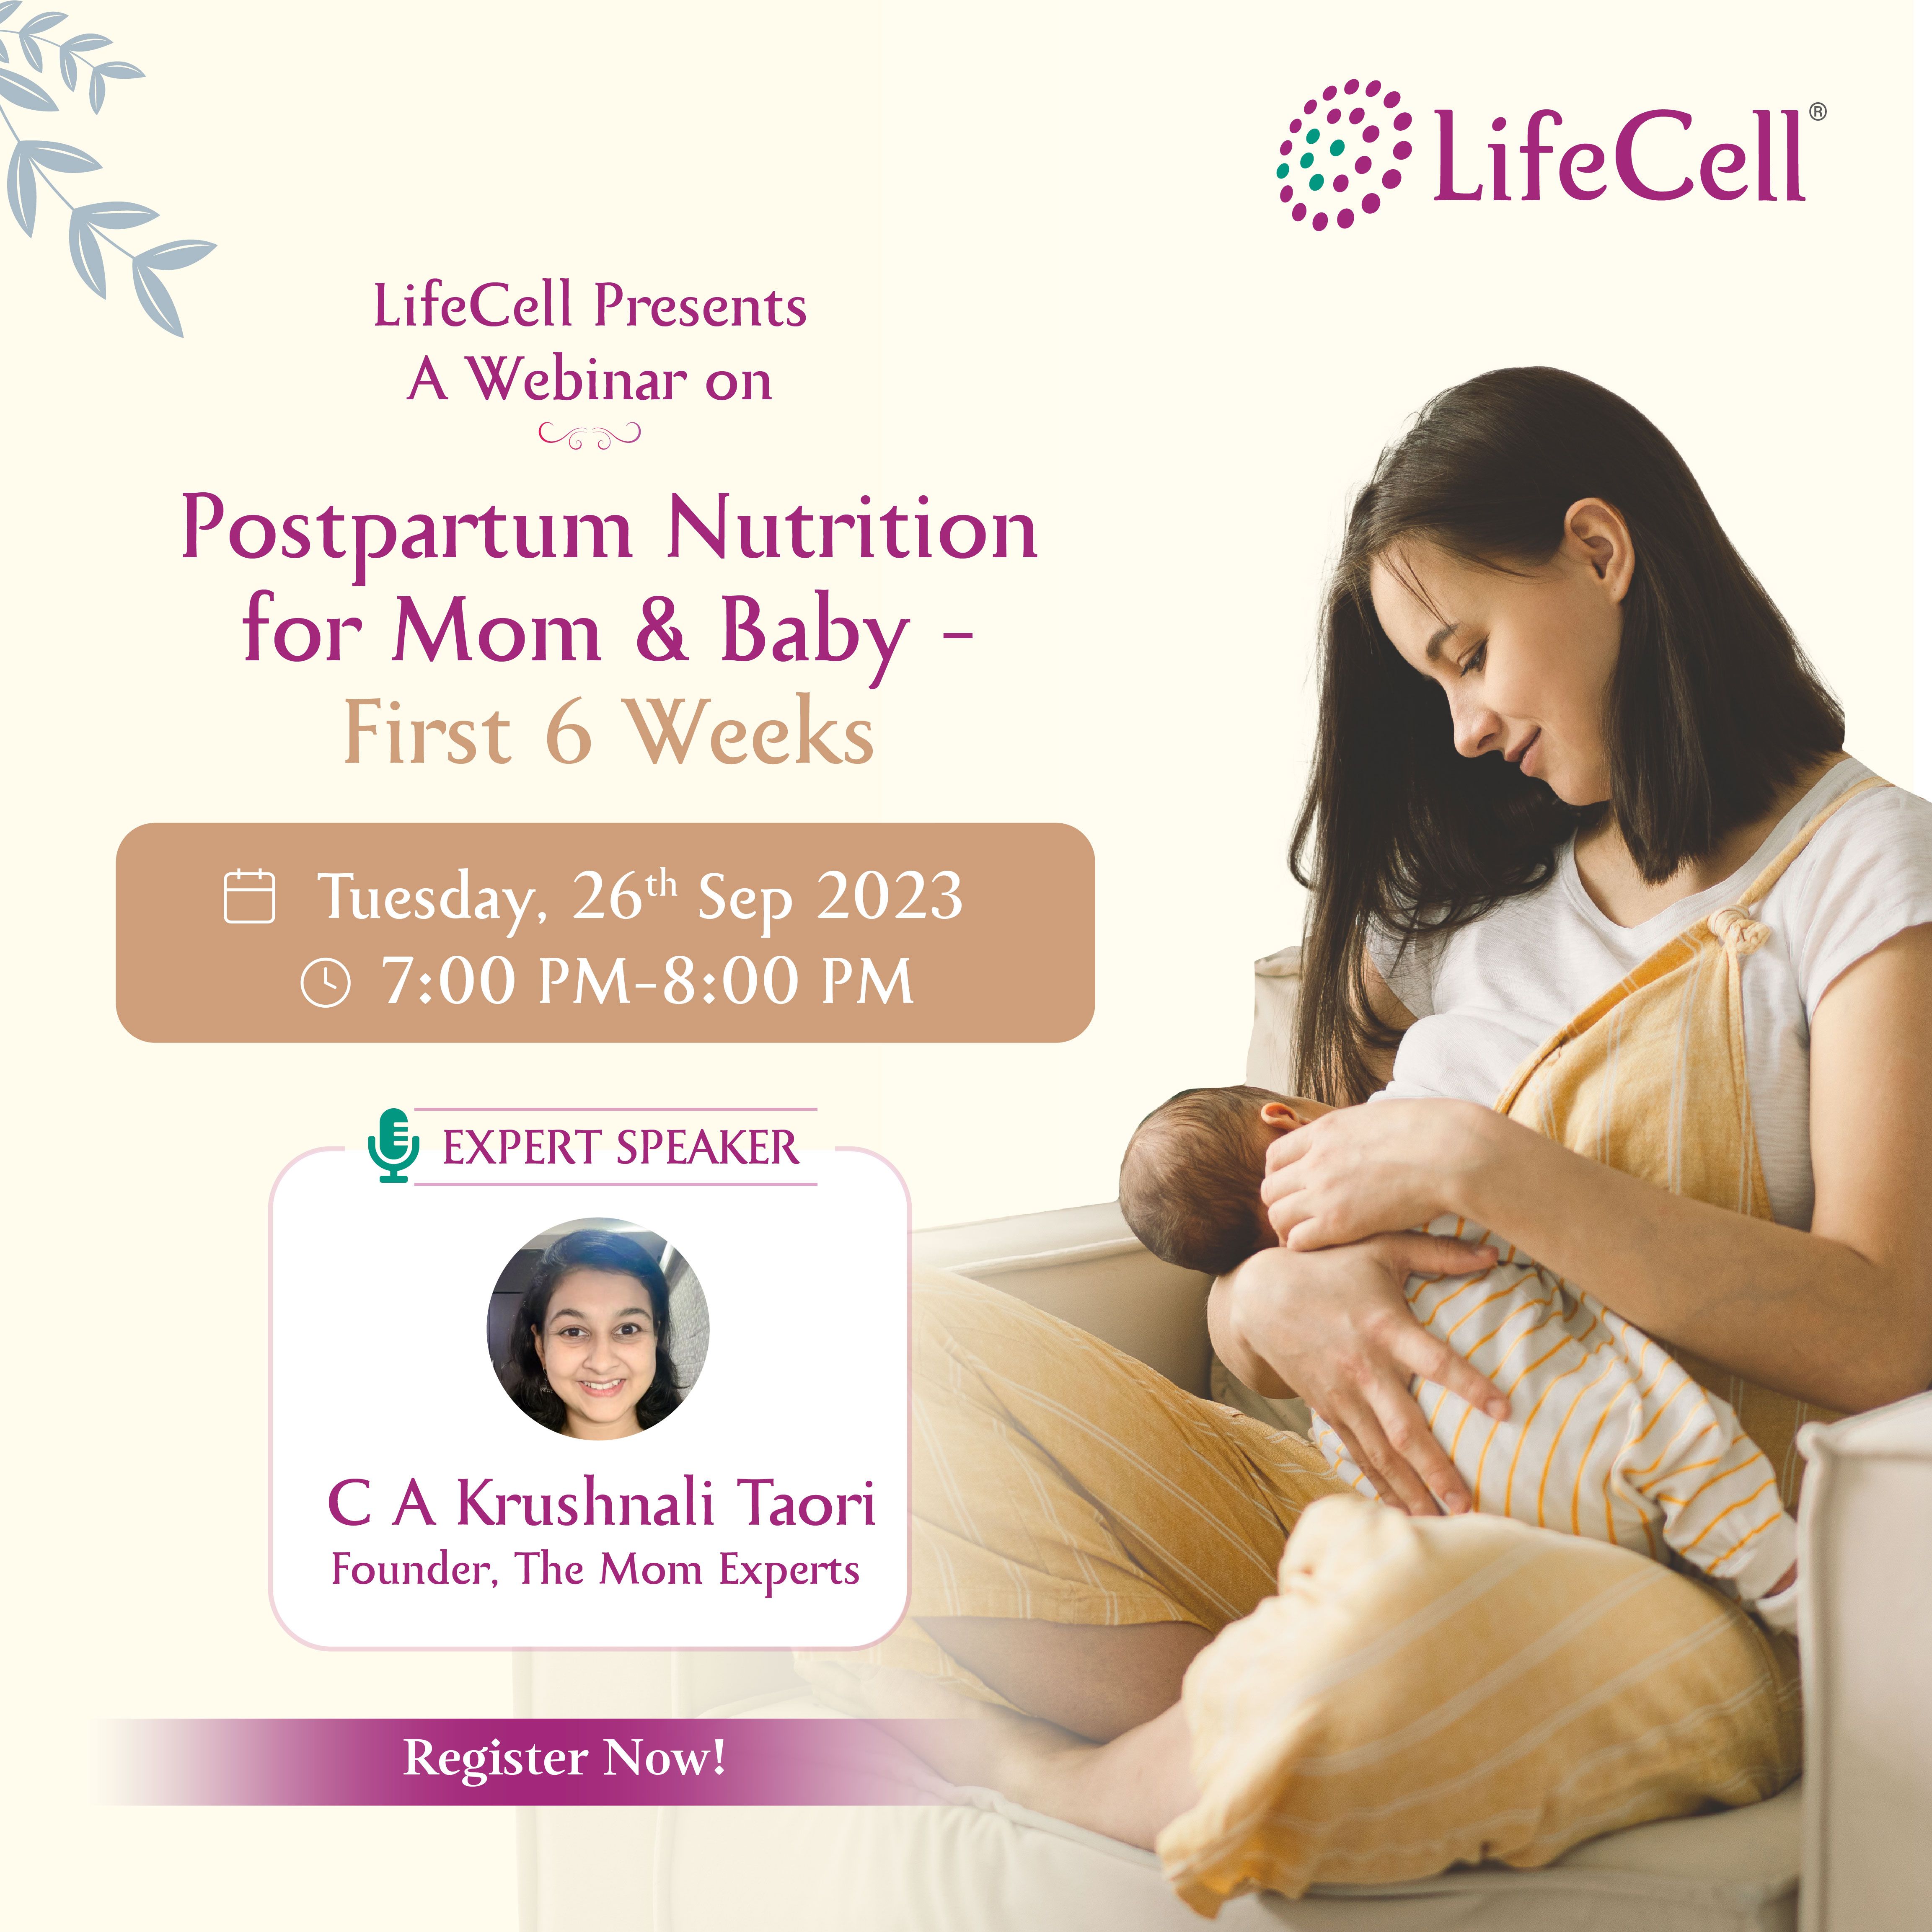 Postpartum Nutrition for Mom and Baby - First 6 Weeks